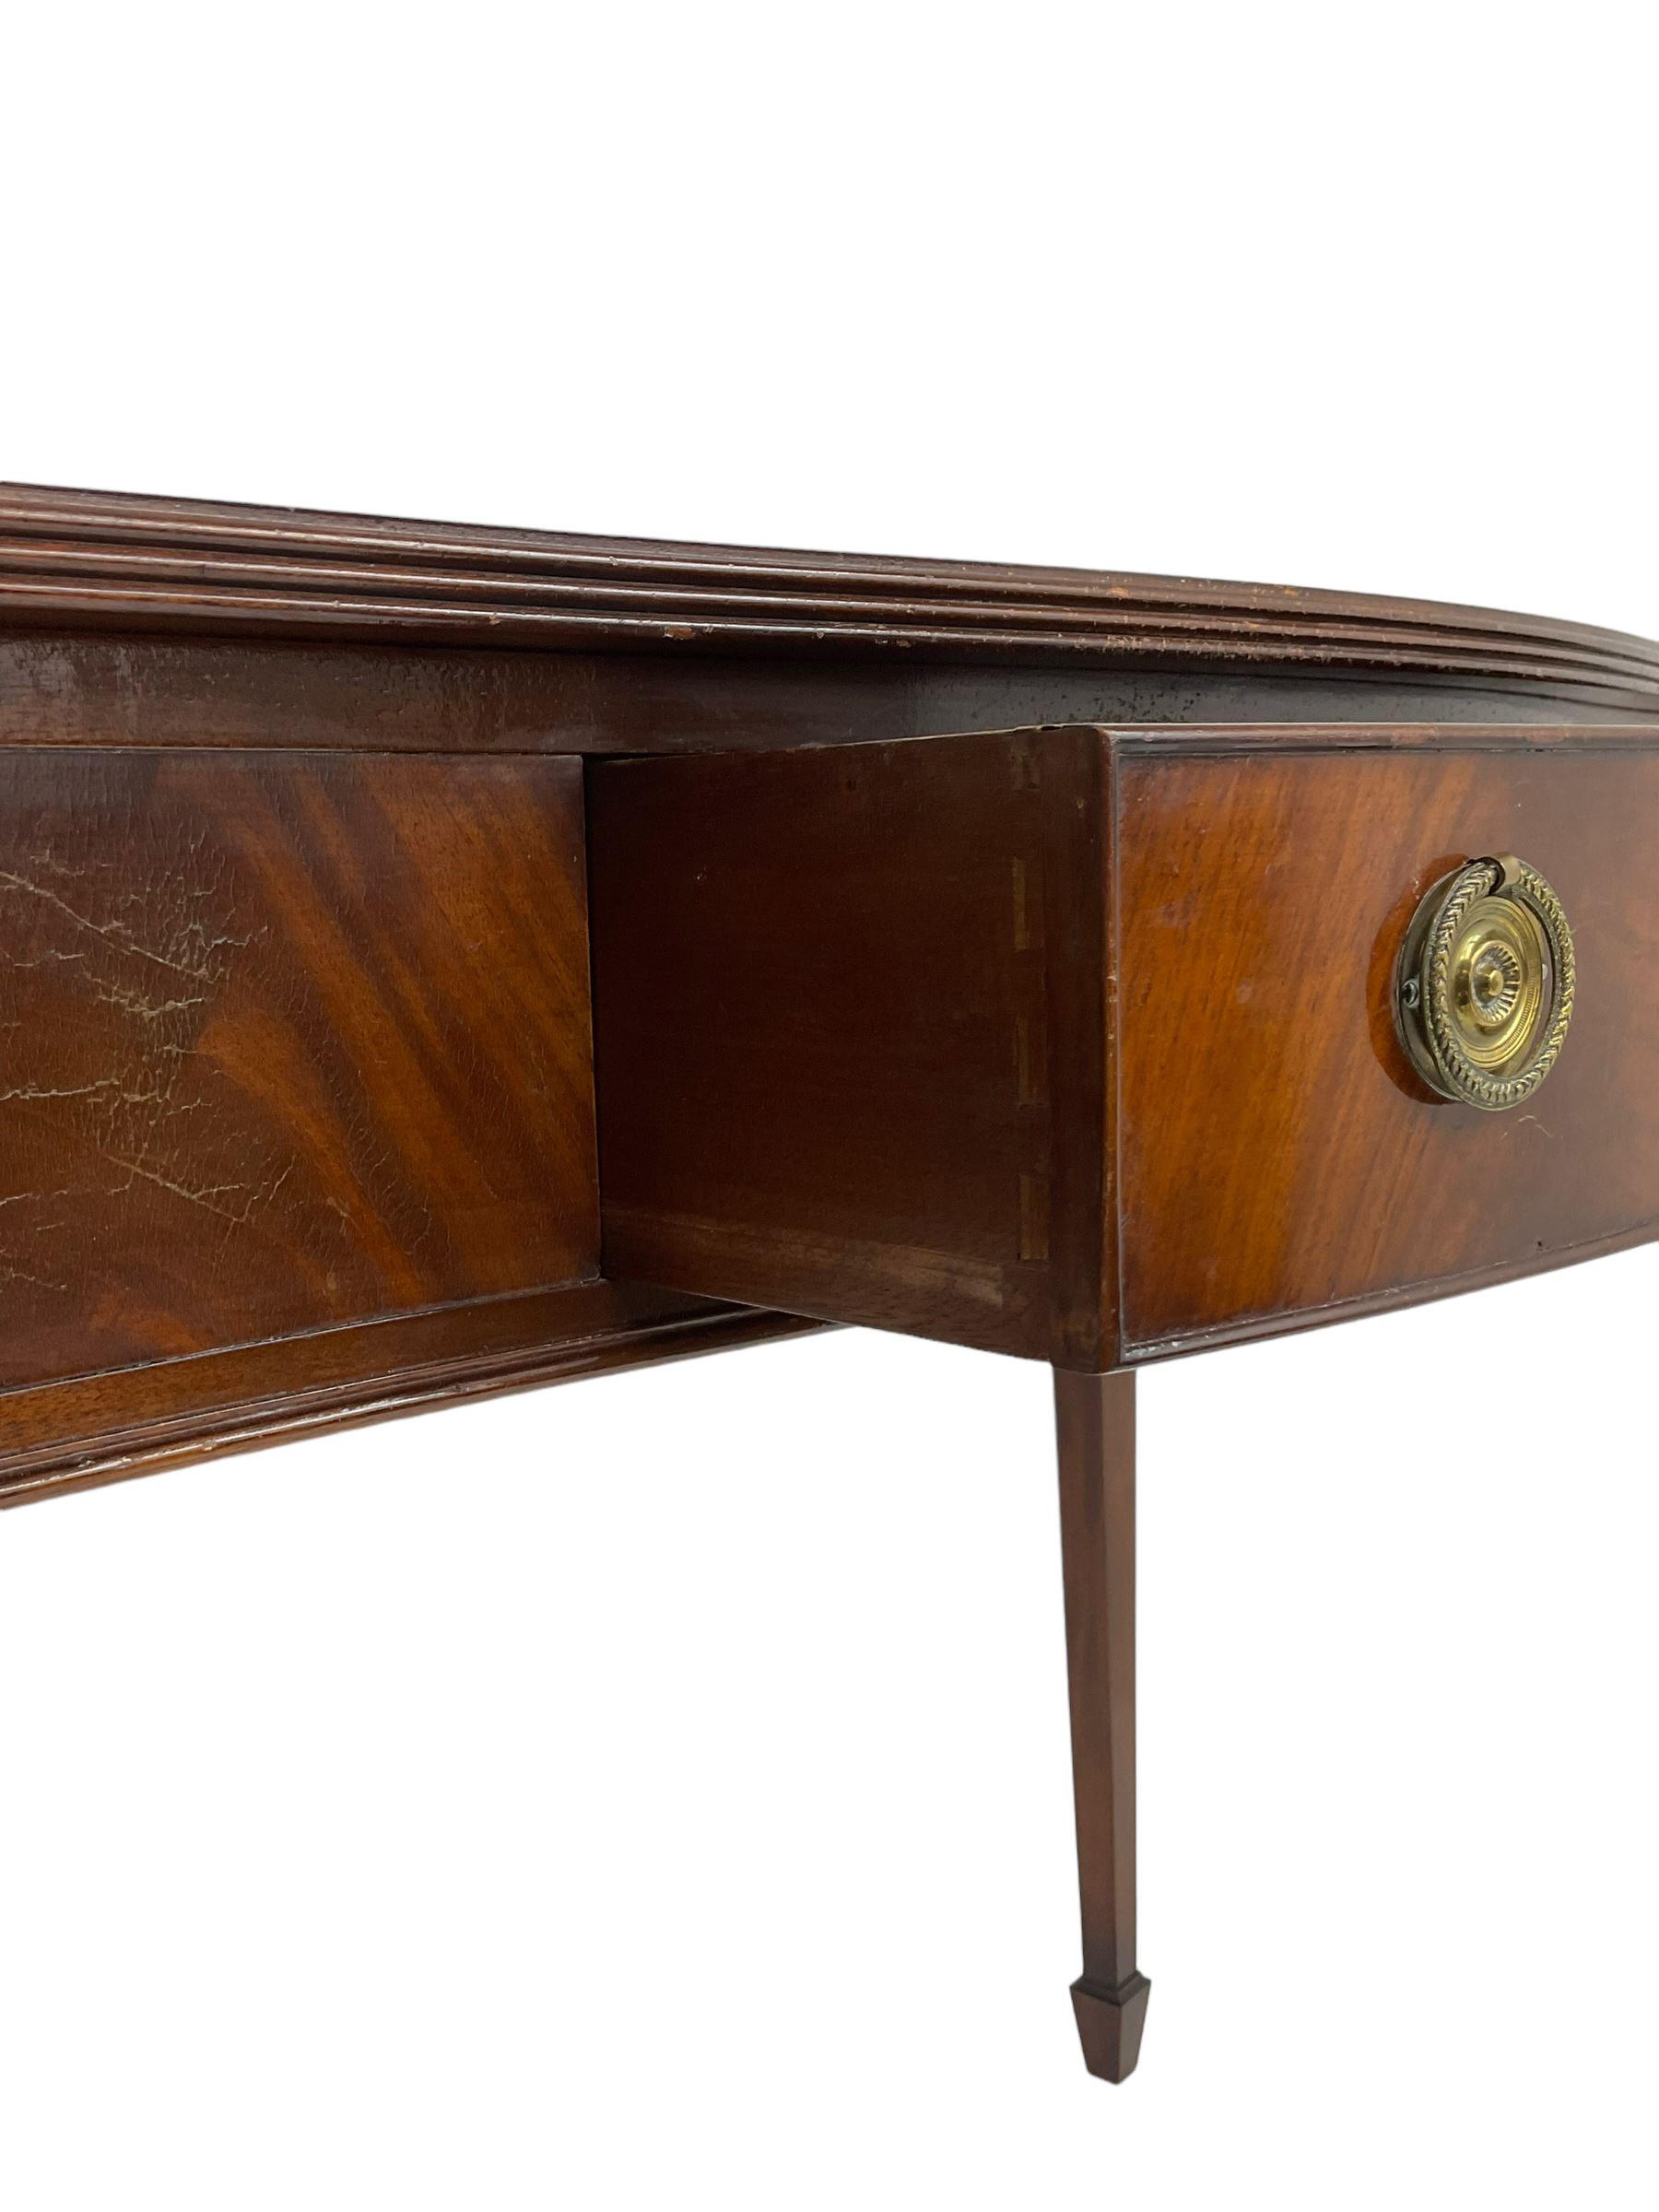 Georgian design mahogany serpentine fronted side table - Image 5 of 5